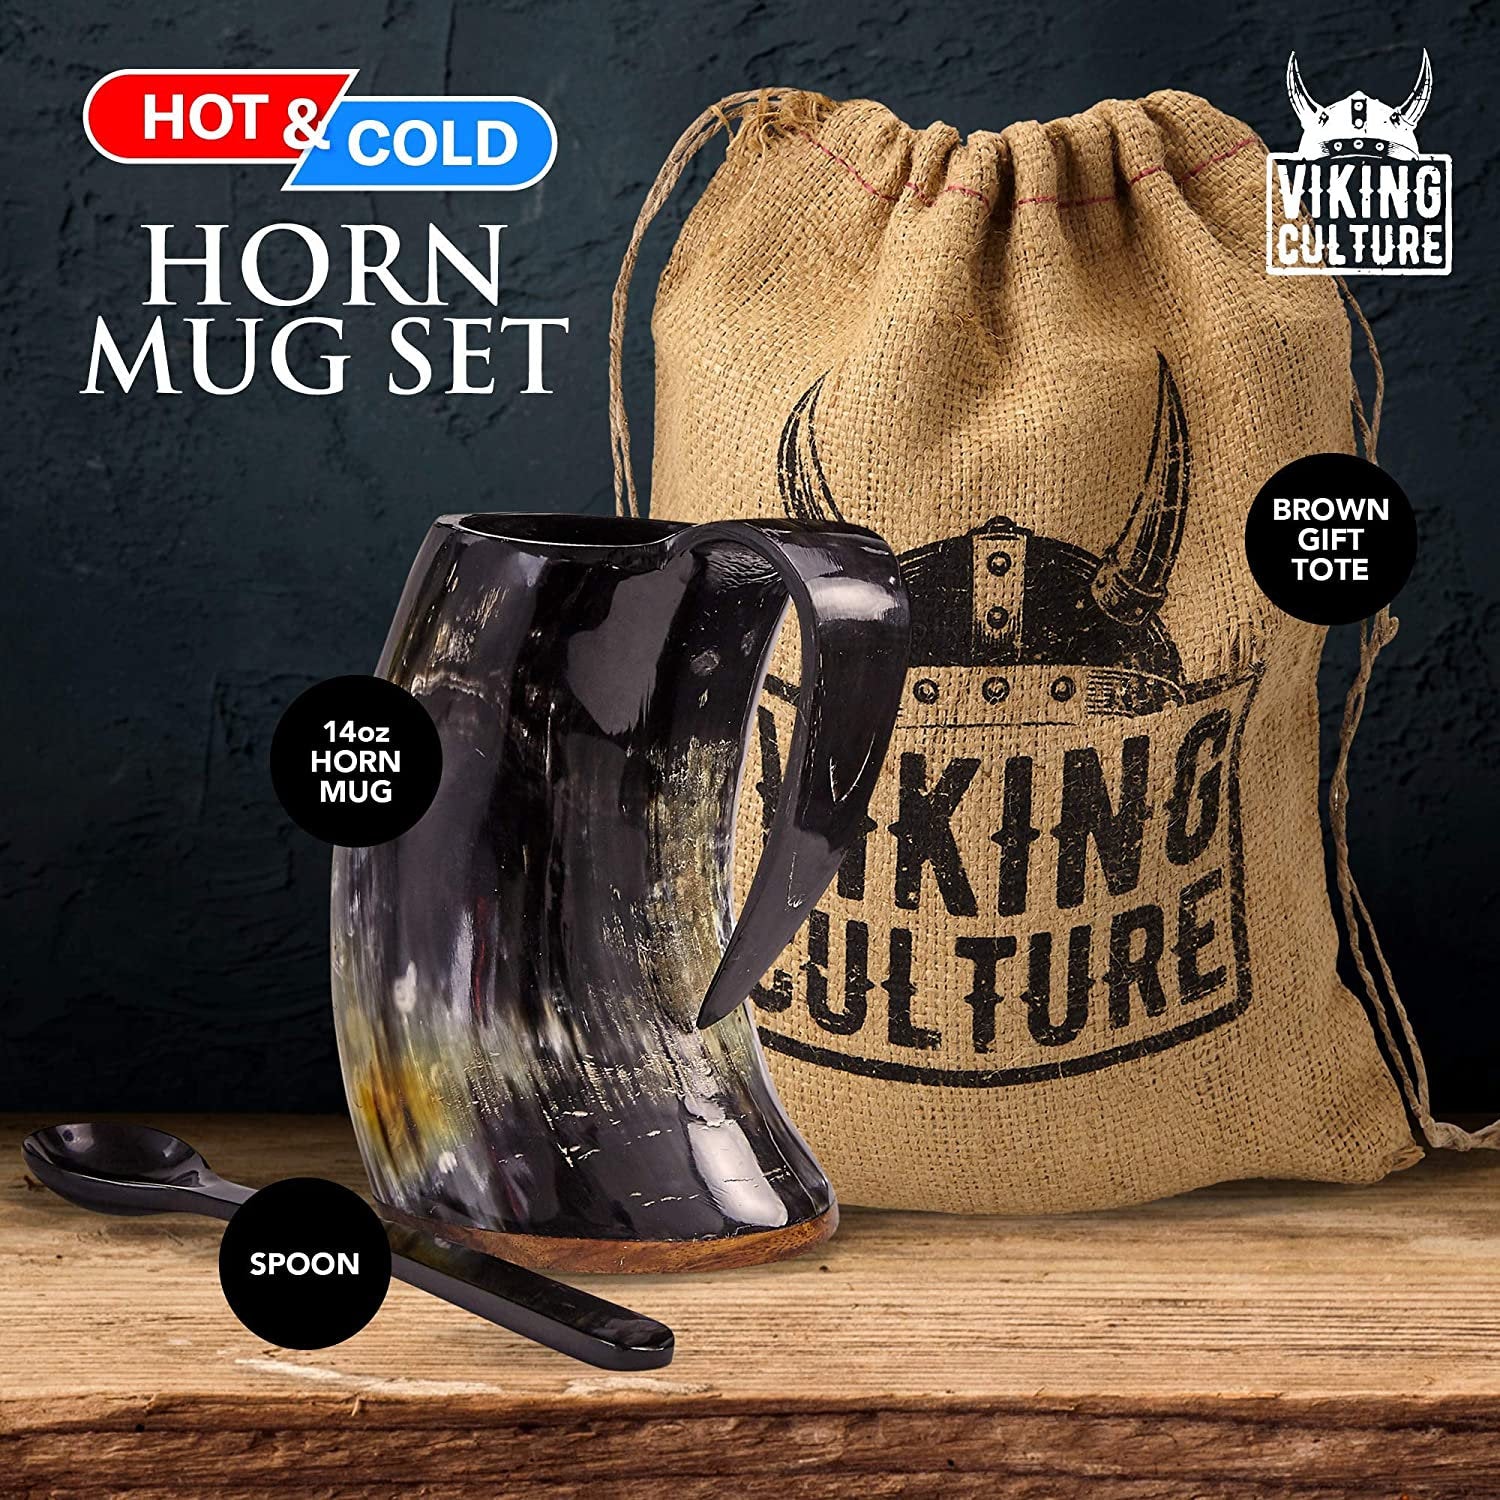 Viking Culture Coffee Horn Mug with Spoon and Bag, 2 Pc Set,Horned Handle with Rustic Natural Finish,Safely Holds Hot and Cold